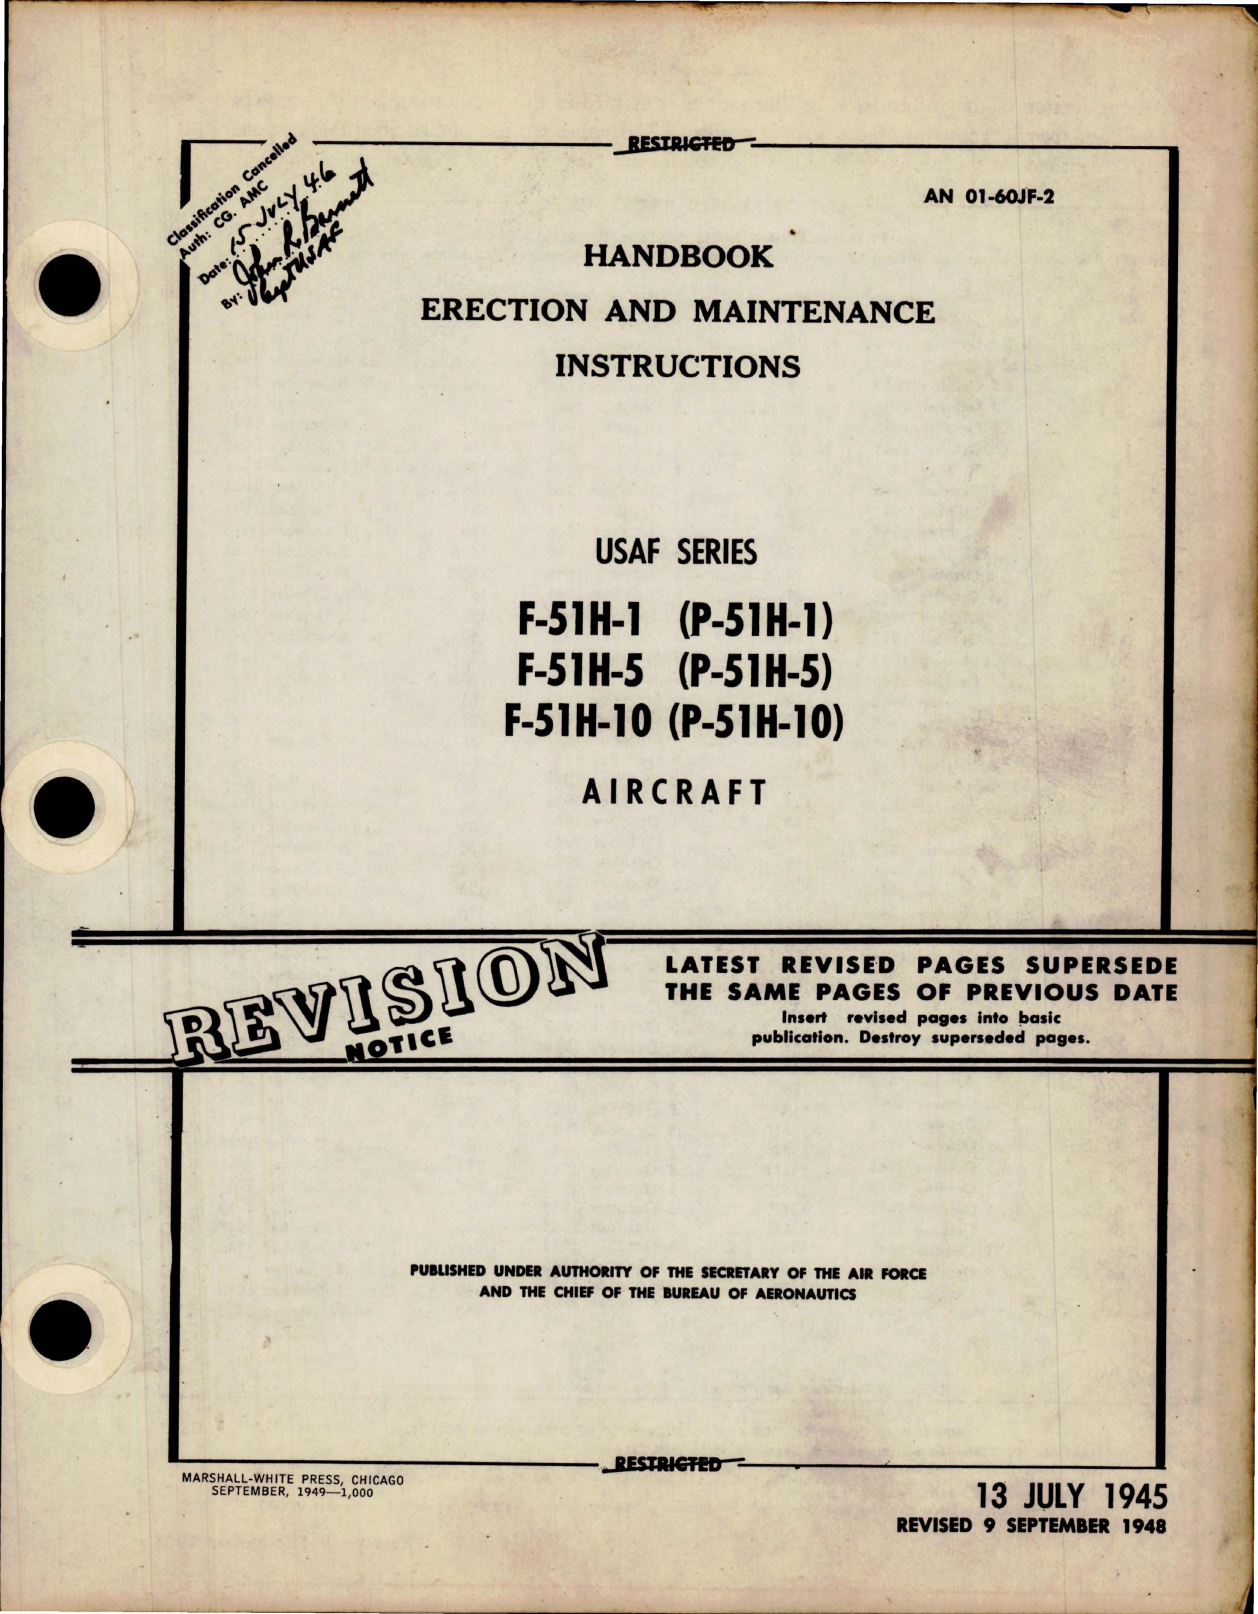 Sample page 1 from AirCorps Library document: Erection and Maintenance Instructions for the F-51H-1, F-51H-5, and F-51H-10 (P-51H-1, P-51H-5, P-51H-10)